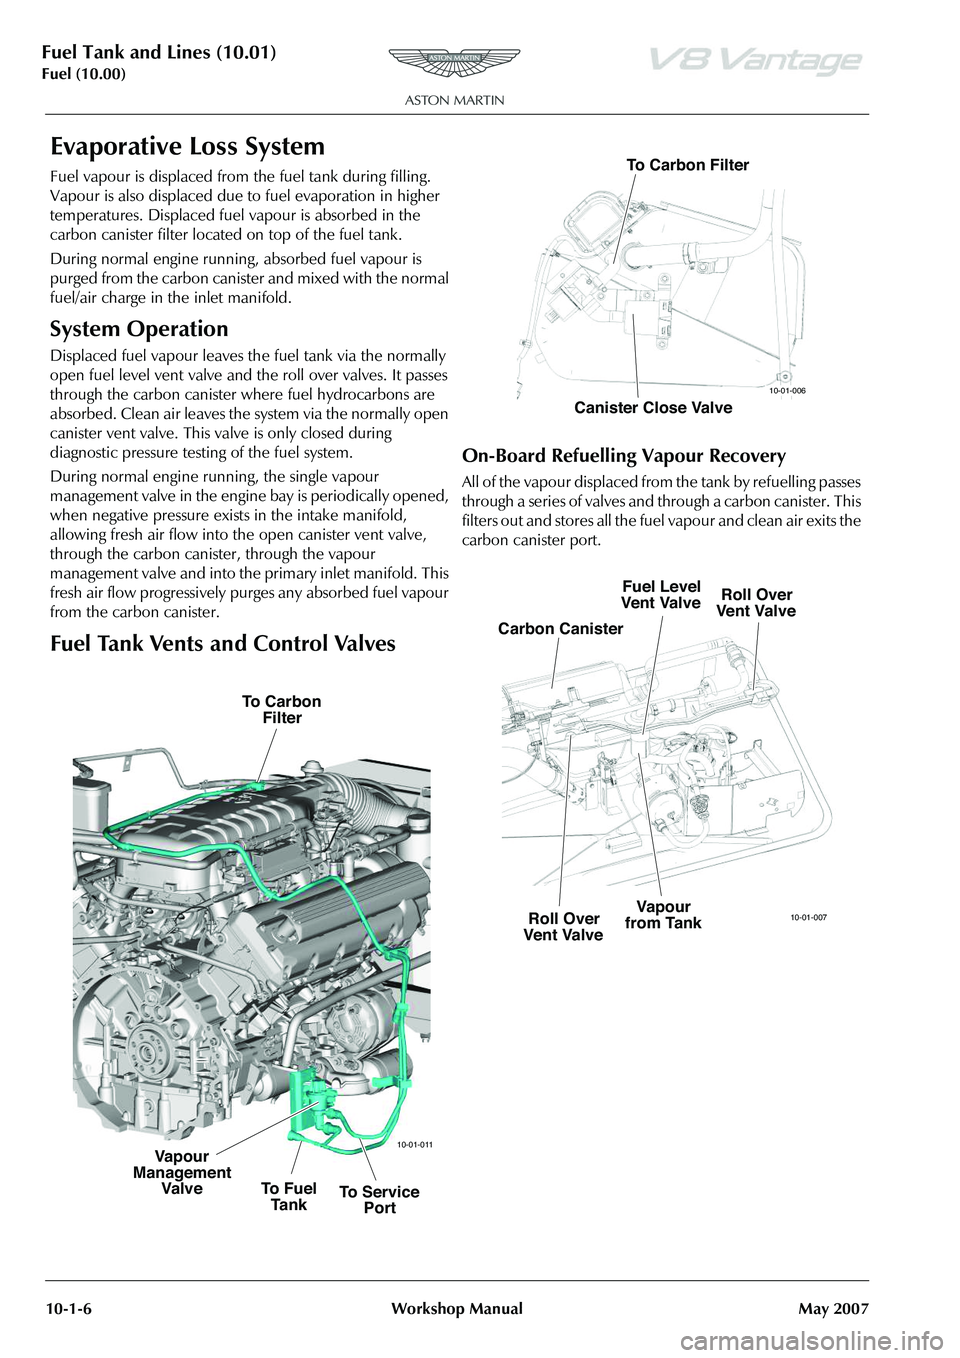 ASTON MARTIN V8 VANTAGE 2010  Workshop Manual Fuel Tank and Lines (10.01)
Fuel (10.00)10-1-6 Workshop Manual May 2007
Evaporative Loss System
Fuel vapour is displaced from the fuel tank during filling. 
Vapour is also displaced due to fuel evapor